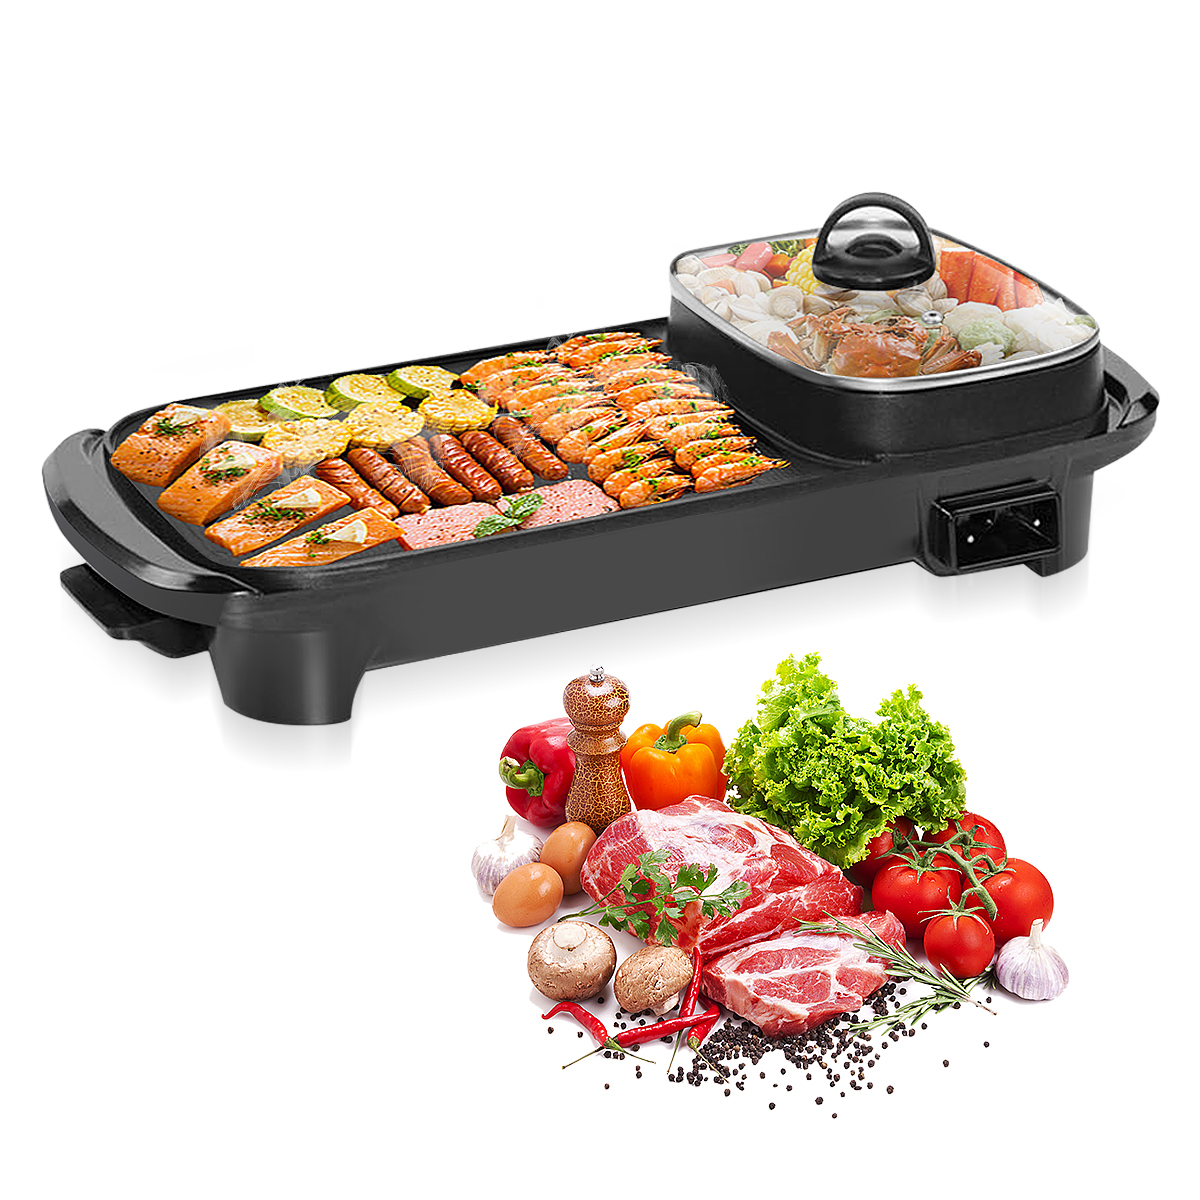 Electric Grills,2 in 1 Electric Hot Pot and Grill Household Non-Stick Hot Pot and BBQ Grill with Glass Lid 1350W Adjustable Barbecue Grill Plate with Hot Pot Round Cook Frying Plate for Home Kitchen